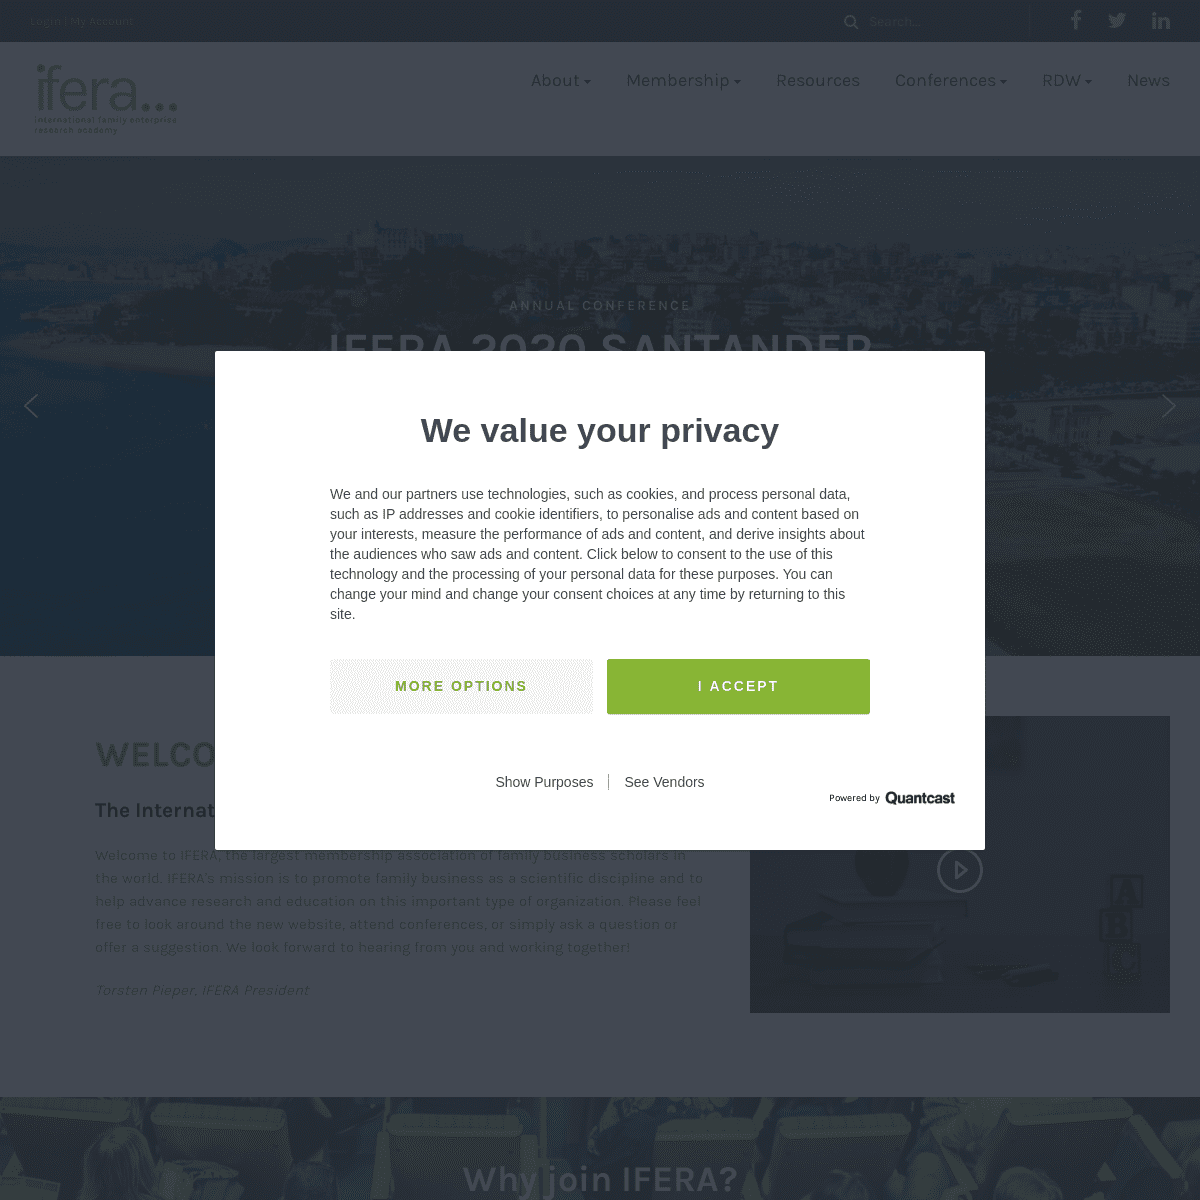 A complete backup of ifera.org